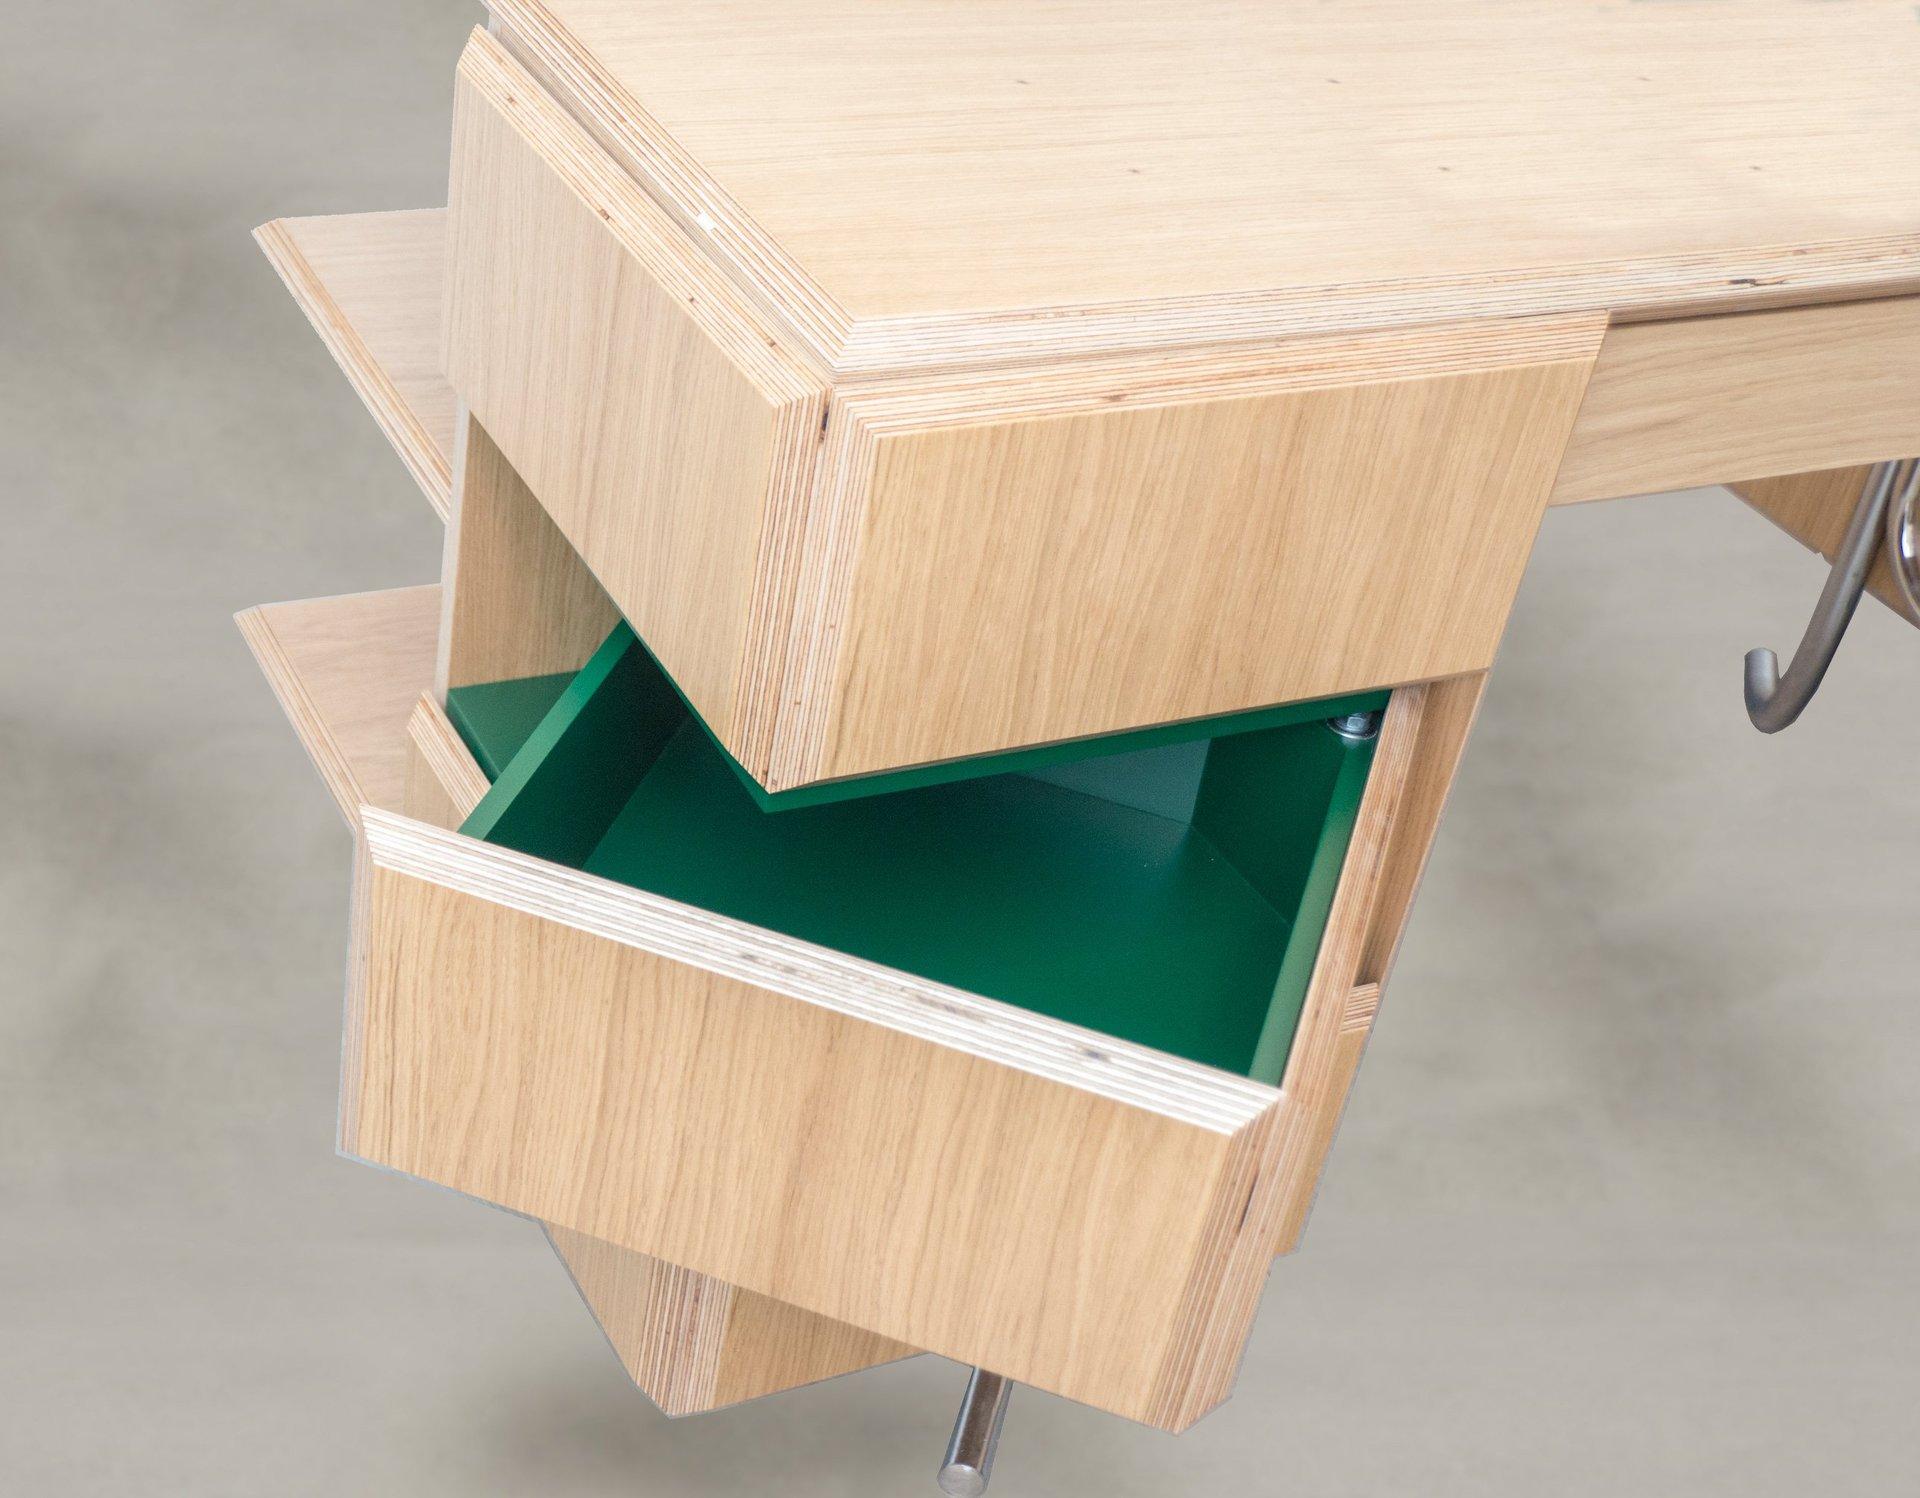 plywood with green edge